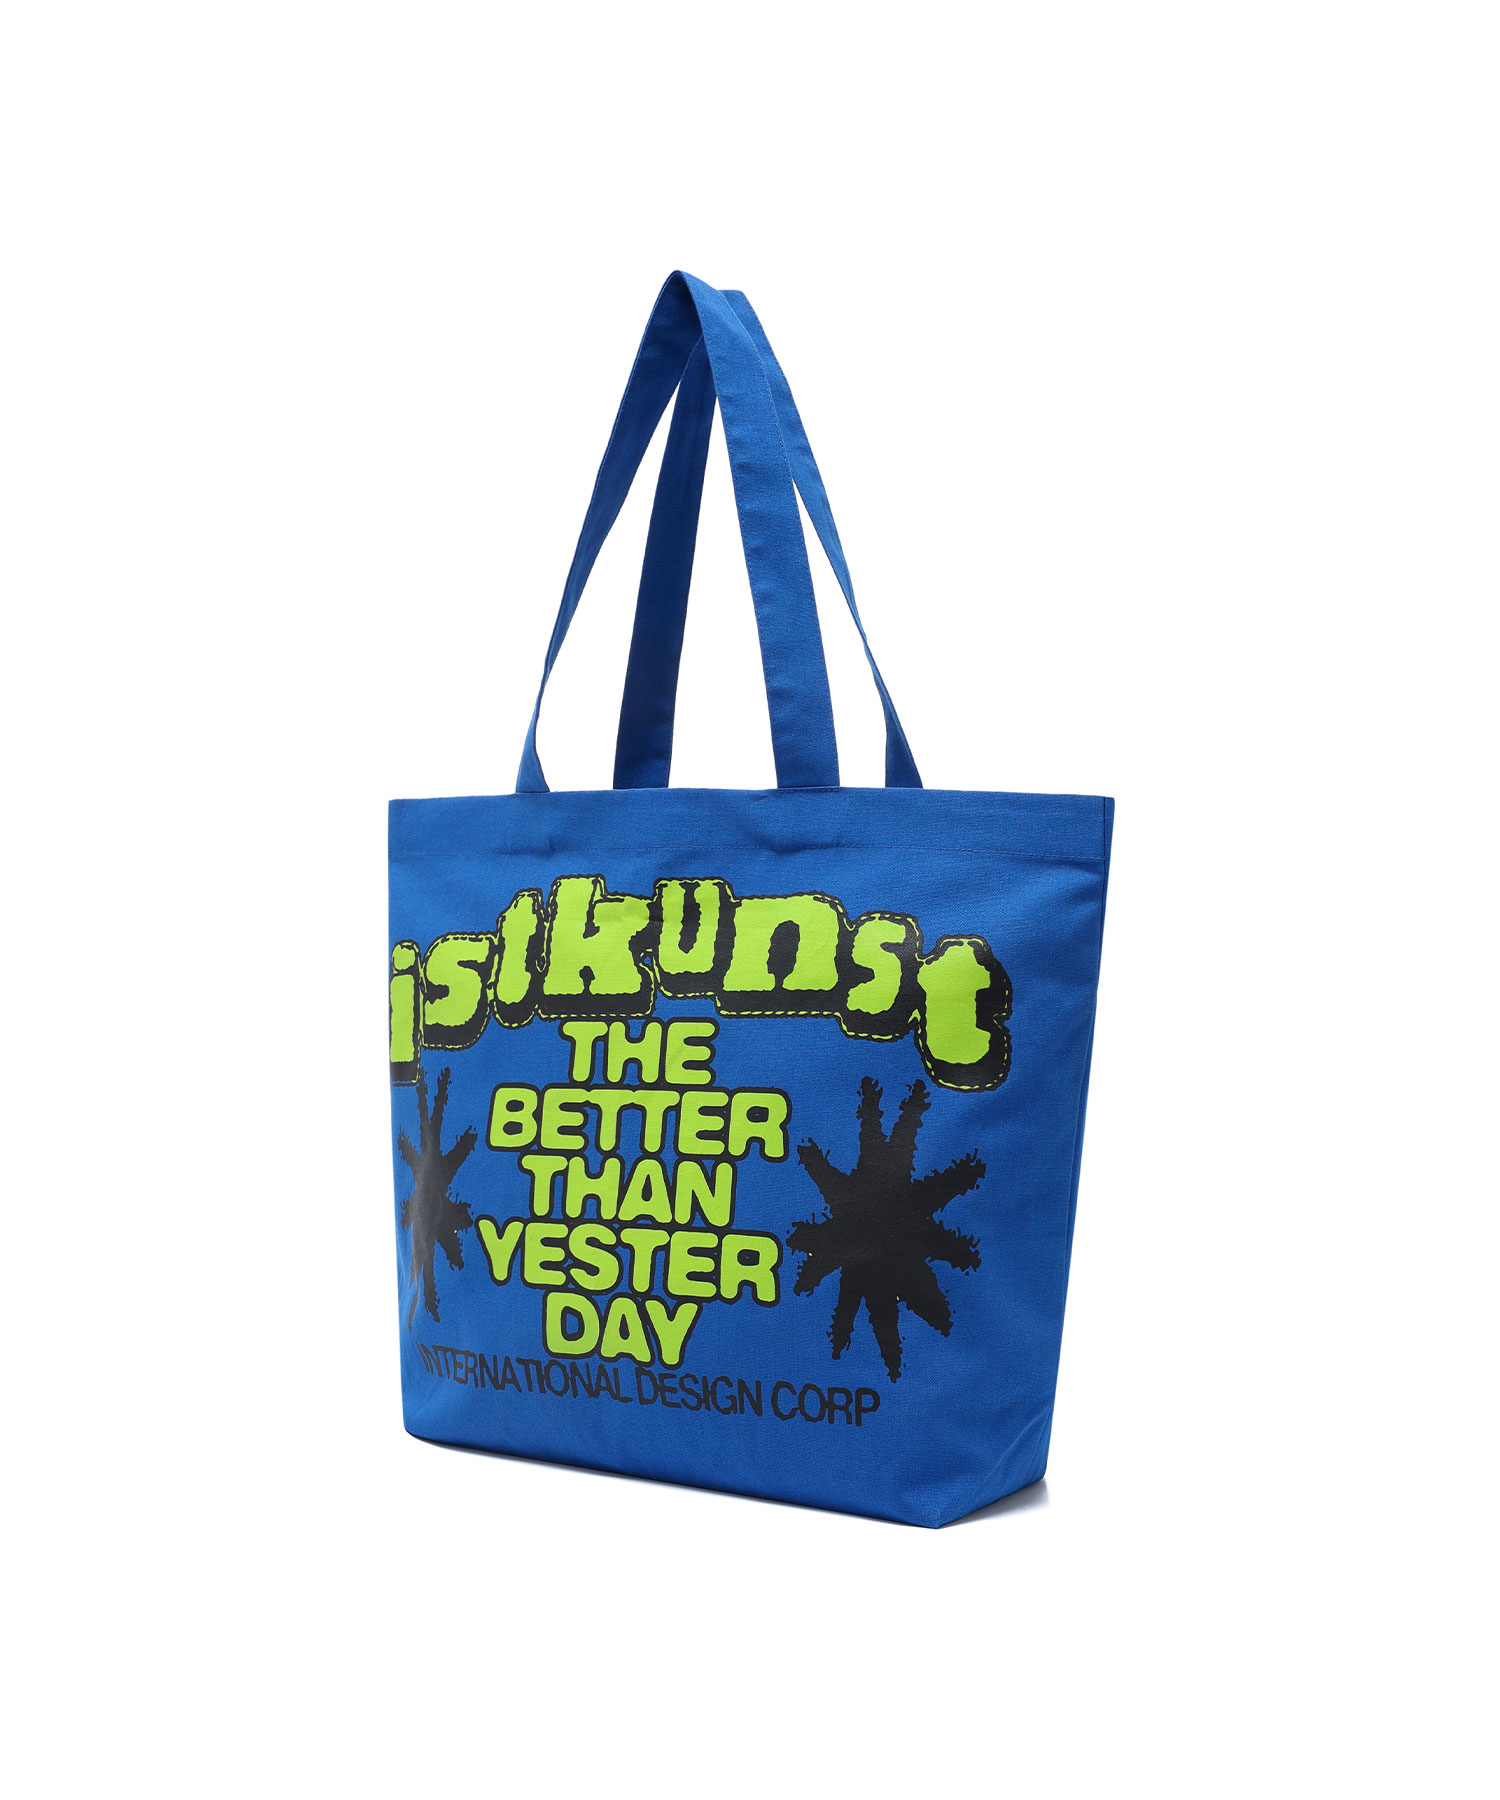 BTY CANVAS TOTE BAG[BLUE]